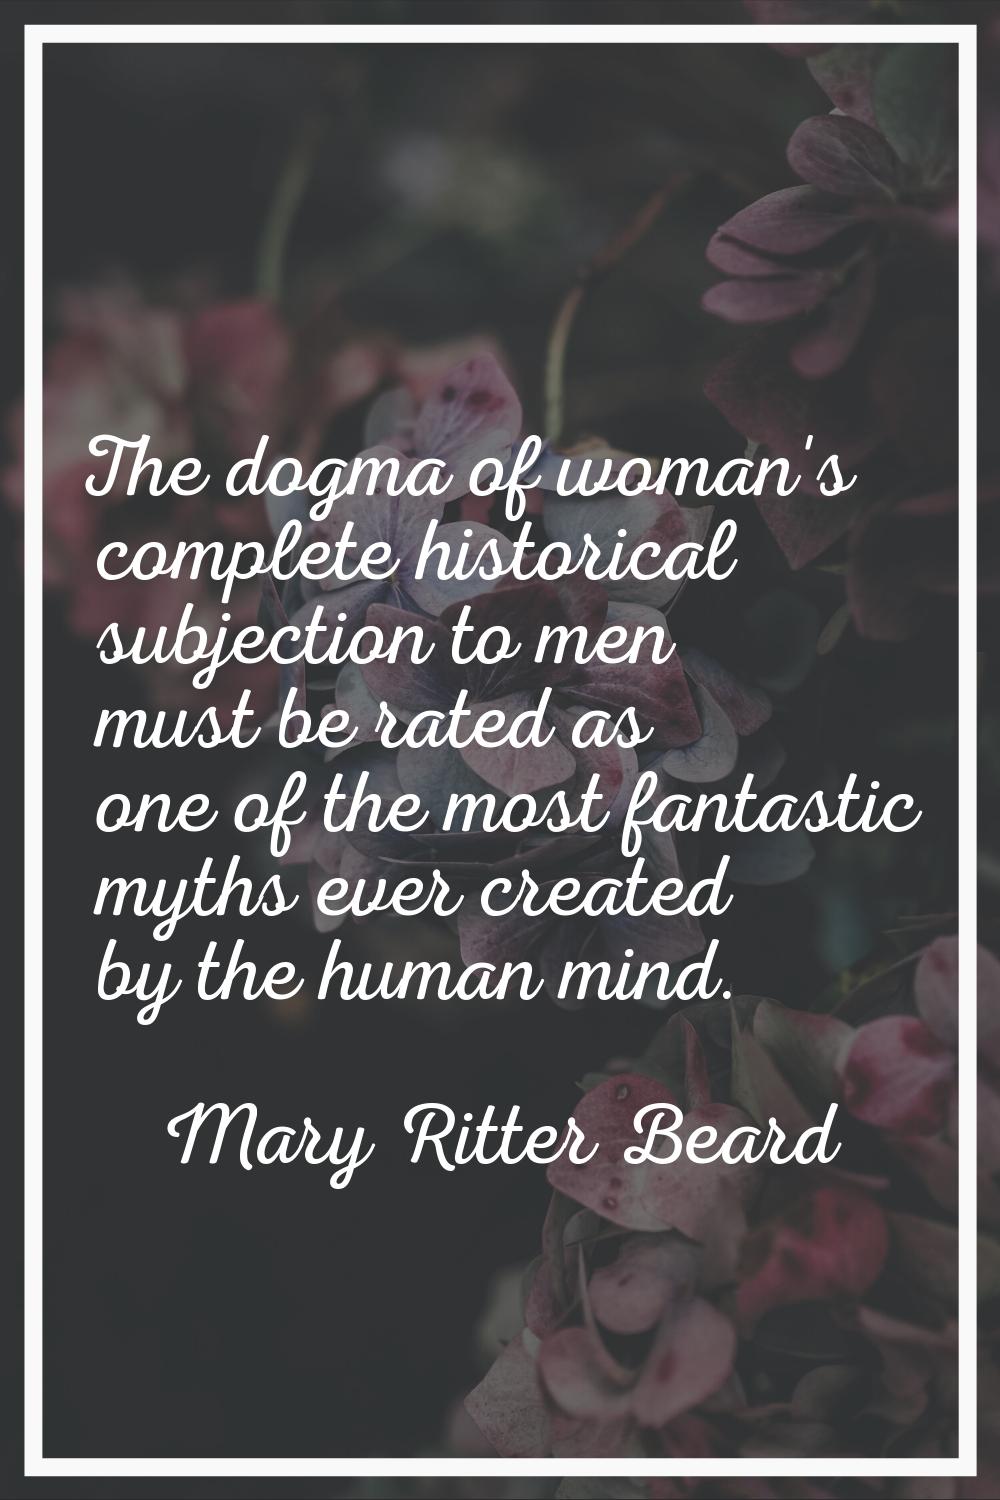 The dogma of woman's complete historical subjection to men must be rated as one of the most fantast